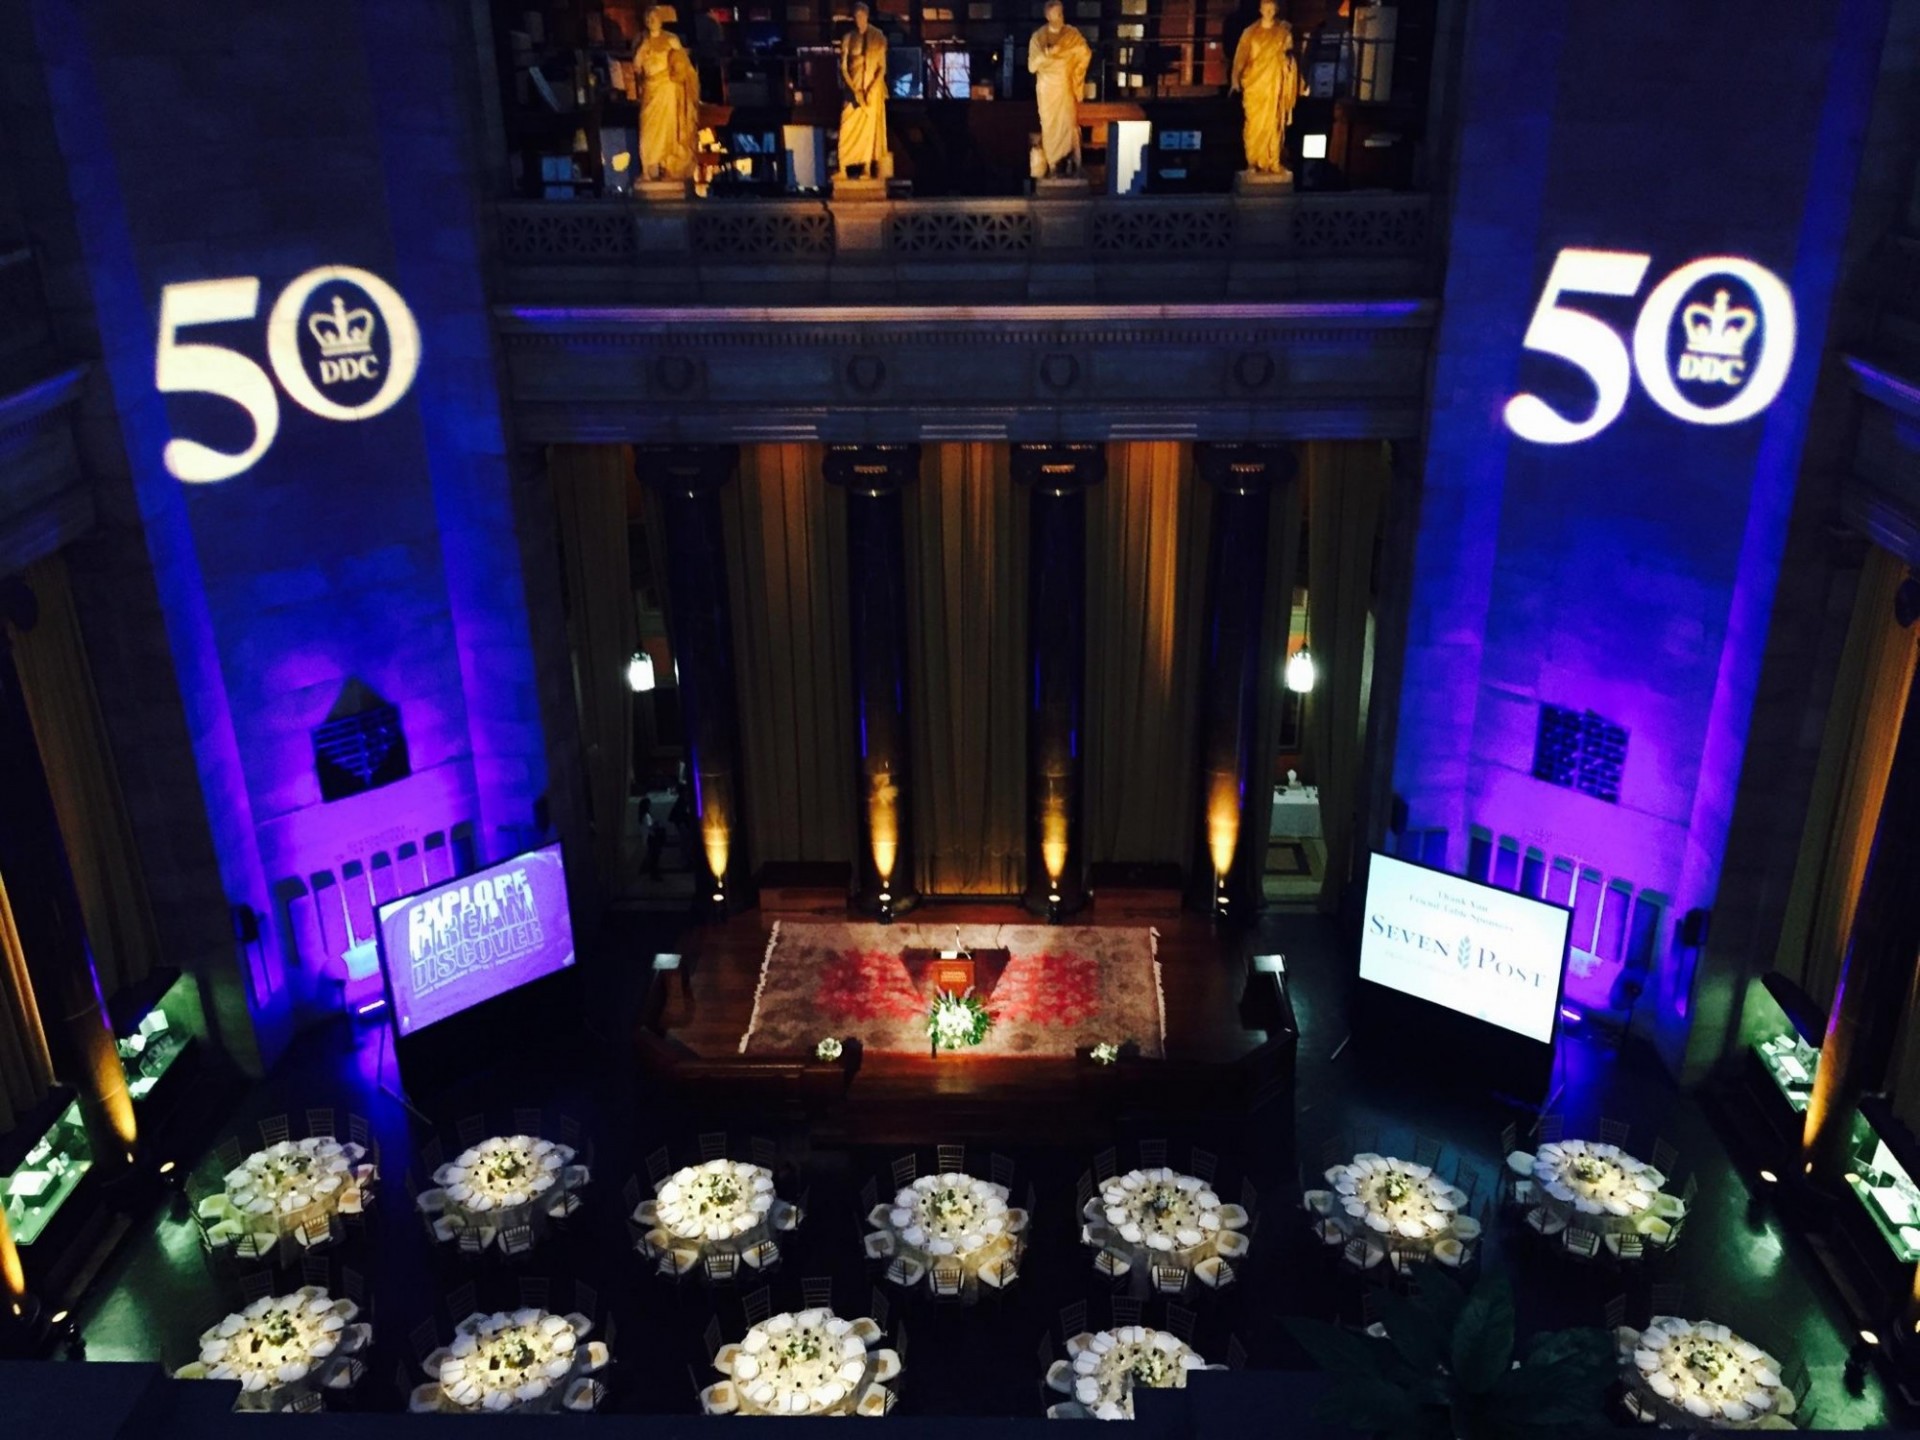 An aerial view of the Rotunda. The room is set with round tables and lights project a logo onto the walls.